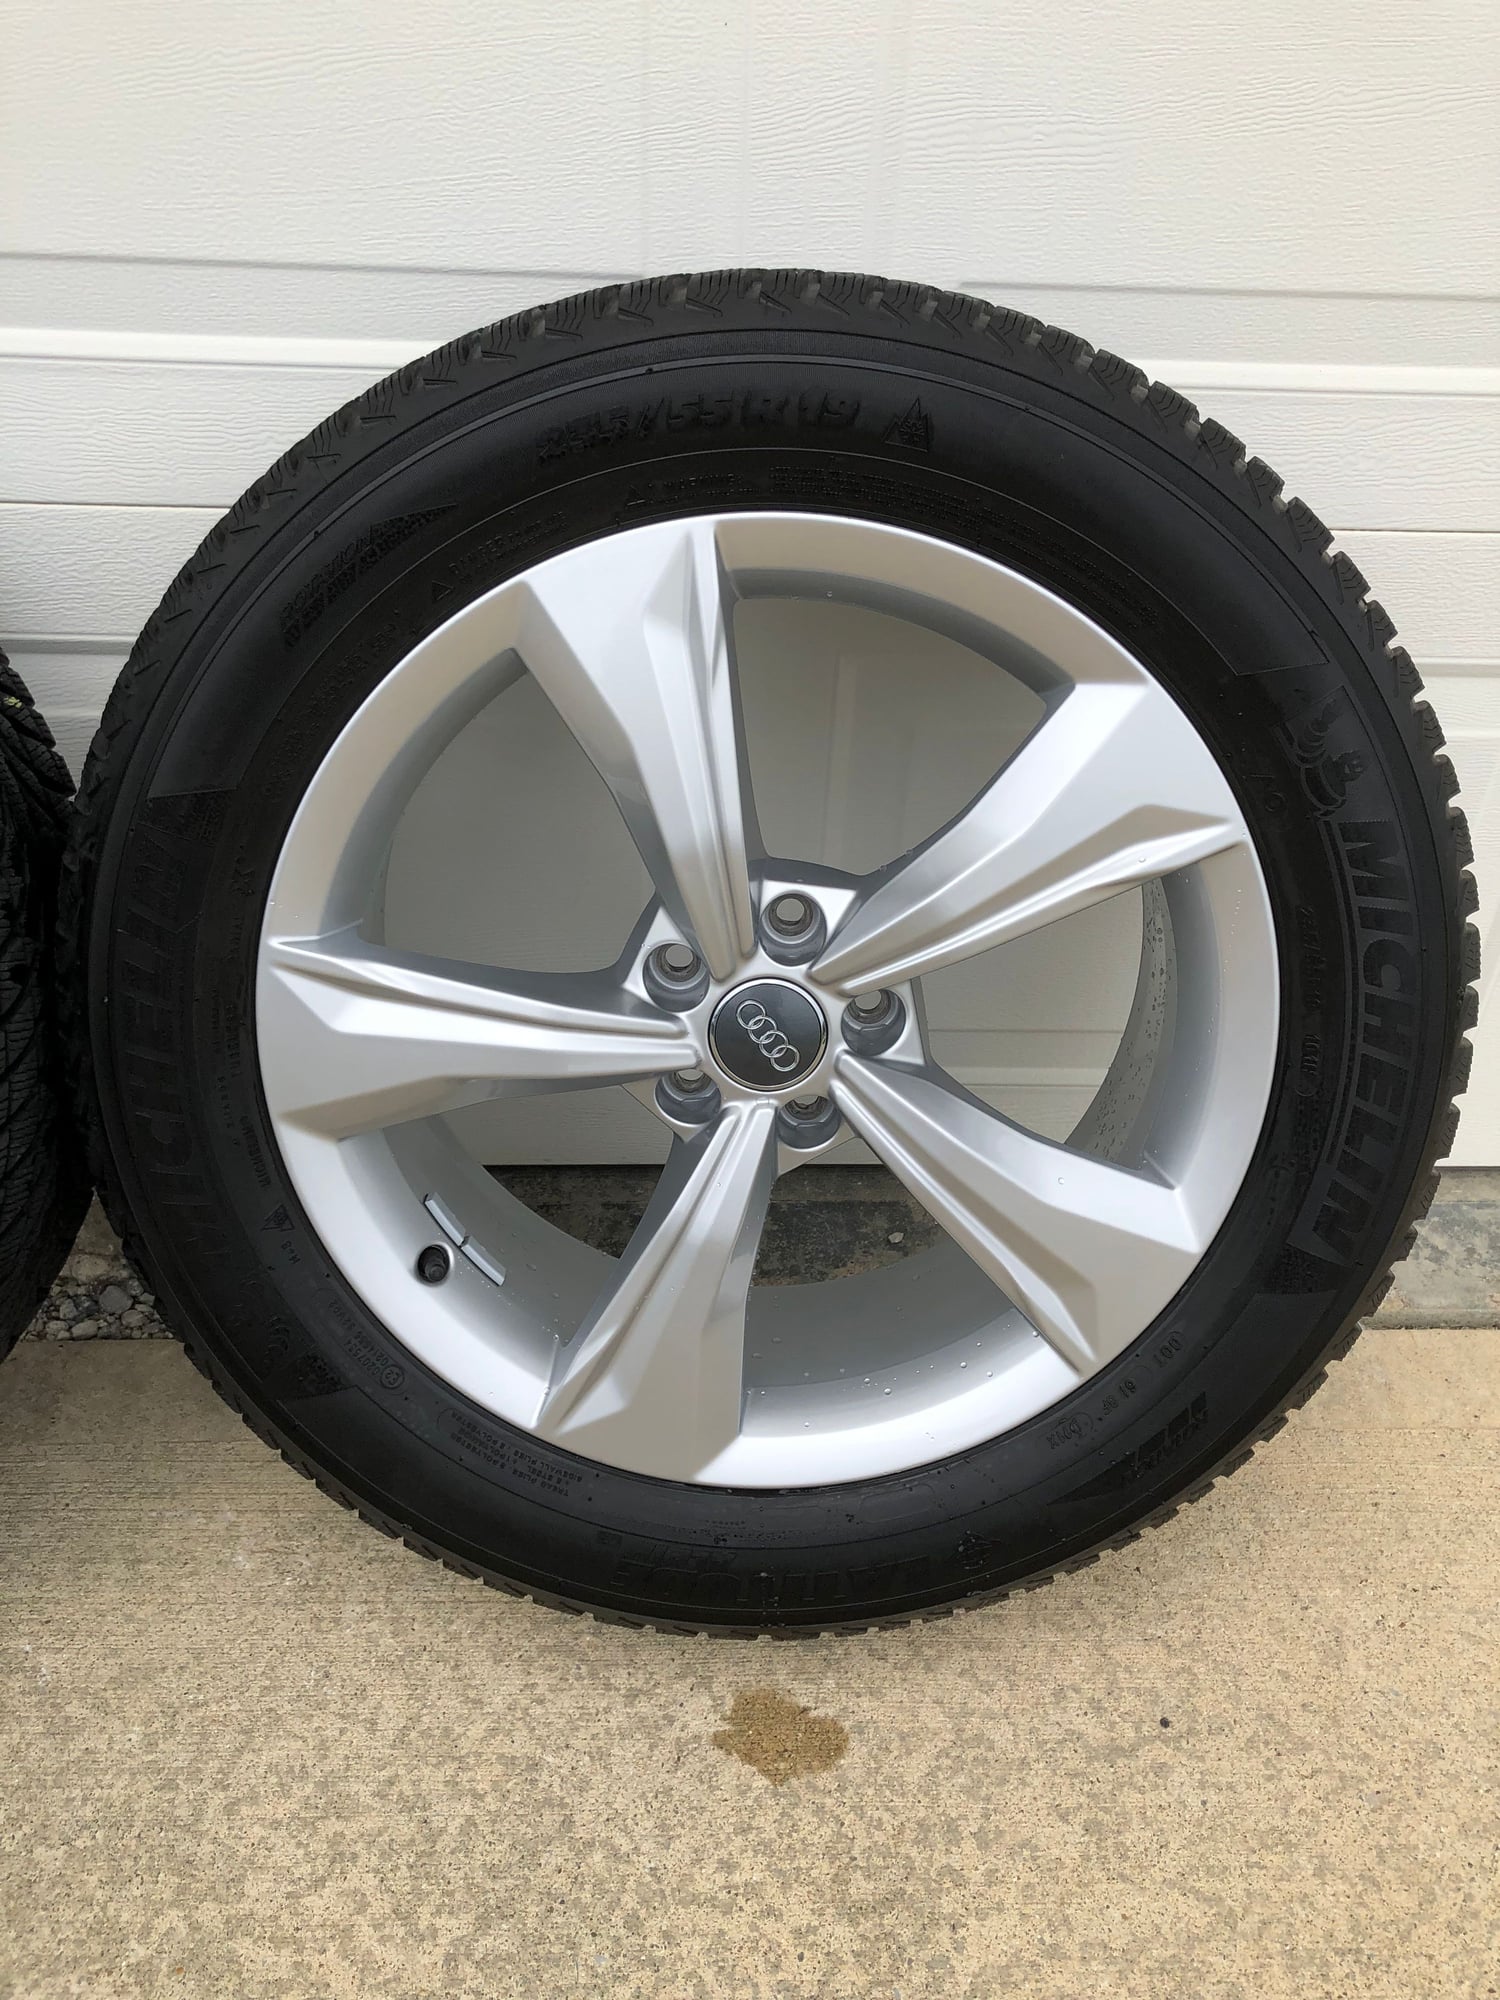 Wheels and Tires/Axles - Audi Q5 SQ5 OEM 19 Inch Winter Tire Wheel Package NPN071070 235/55/19 7J - Used - 2017 to 2021 Audi Q5 - 2017 to 2021 Audi SQ5 - Carmel, IN 46074, United States